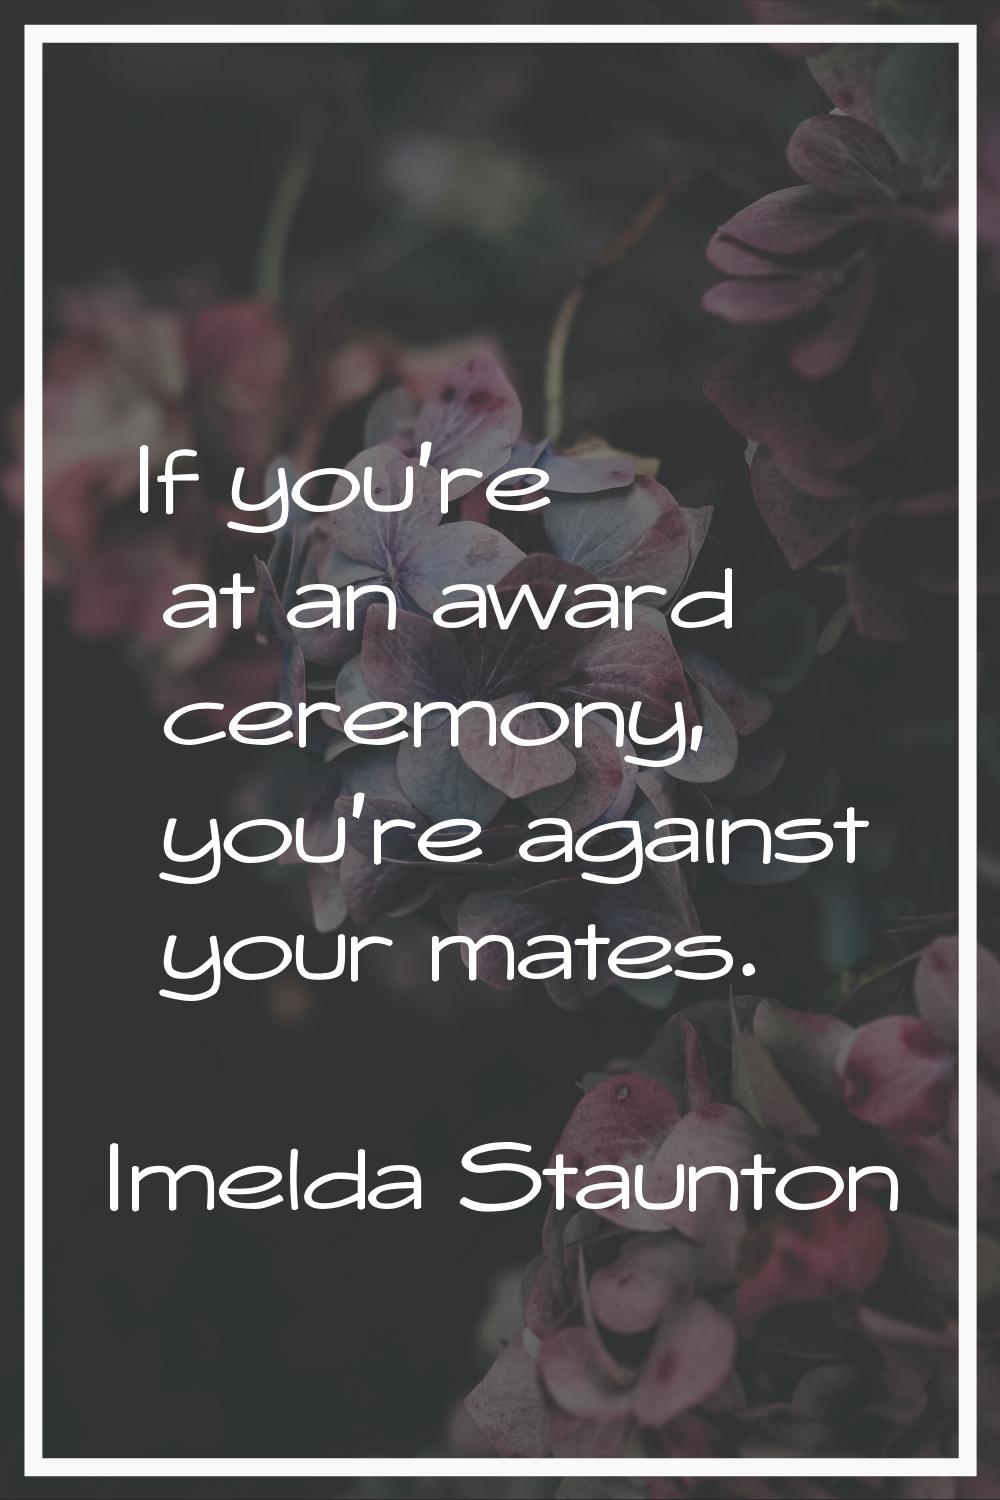 If you're at an award ceremony, you're against your mates.